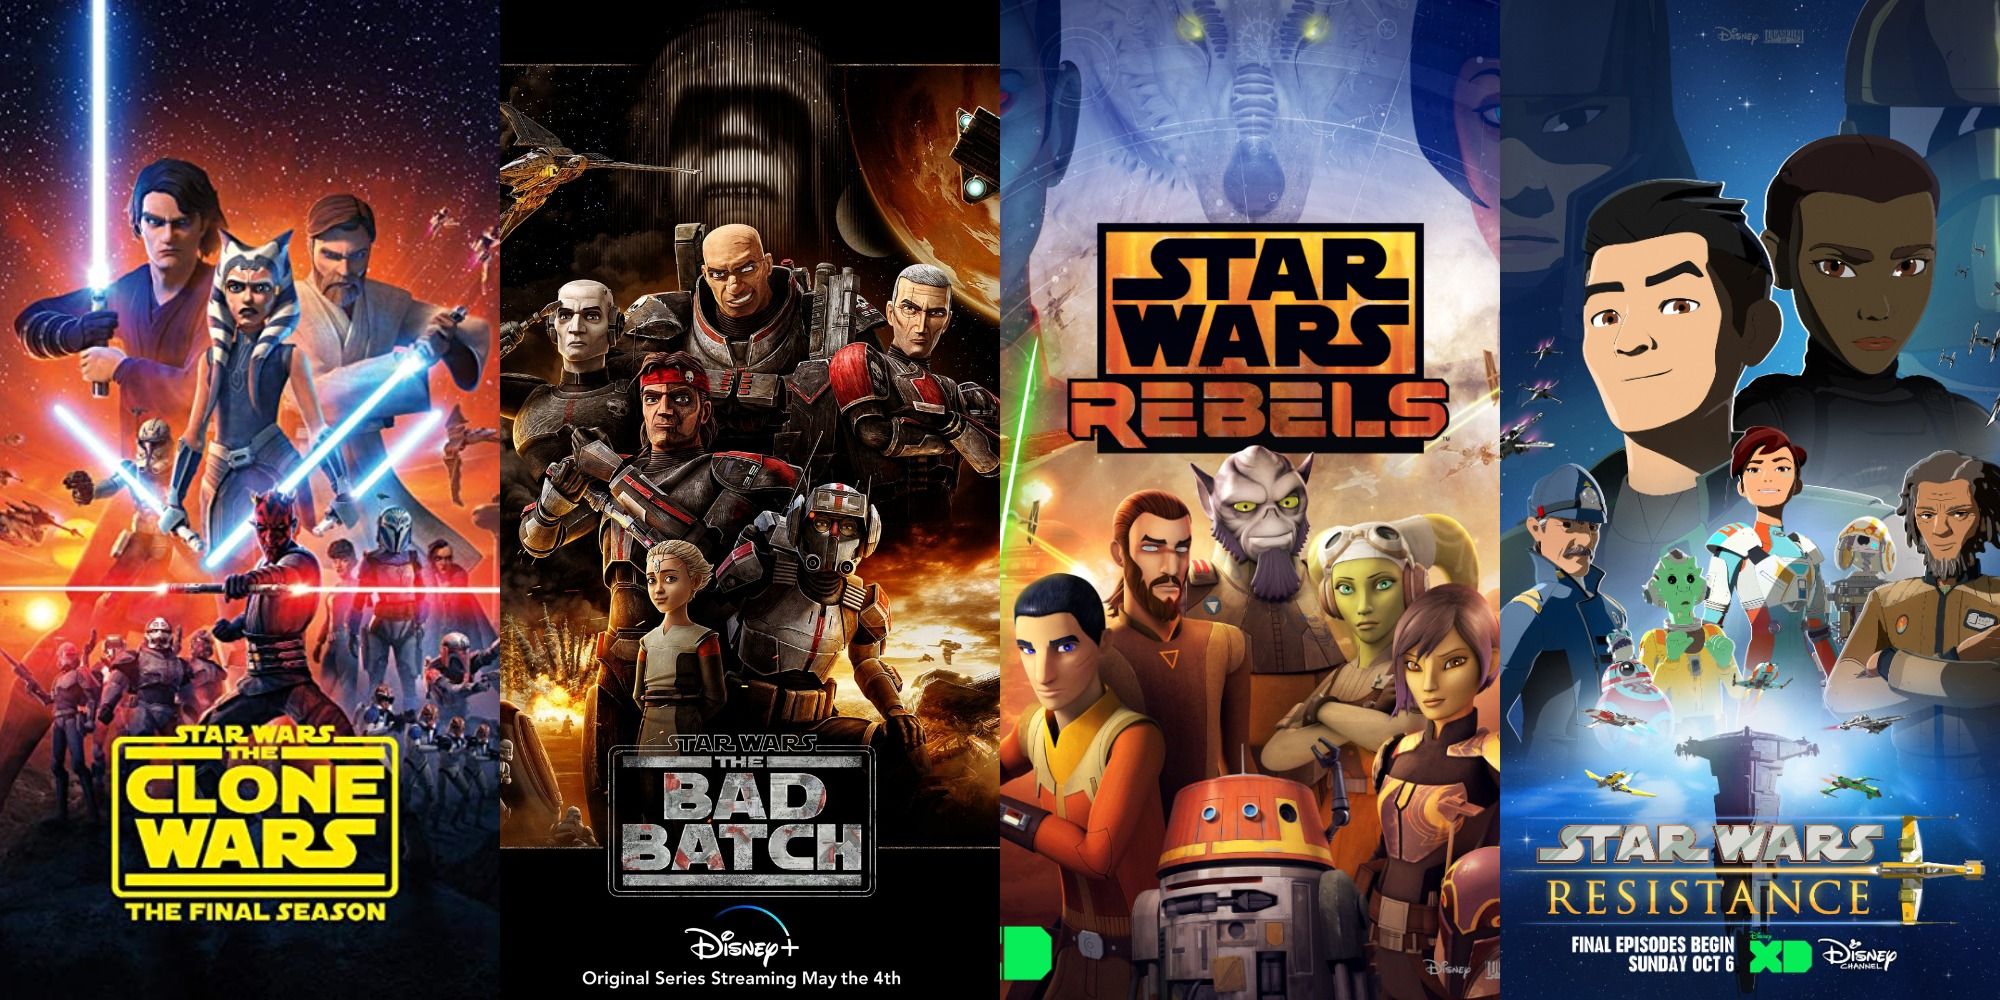 Star Wars: Every Season Of The Animated Shows, Ranked (According To IMDb)